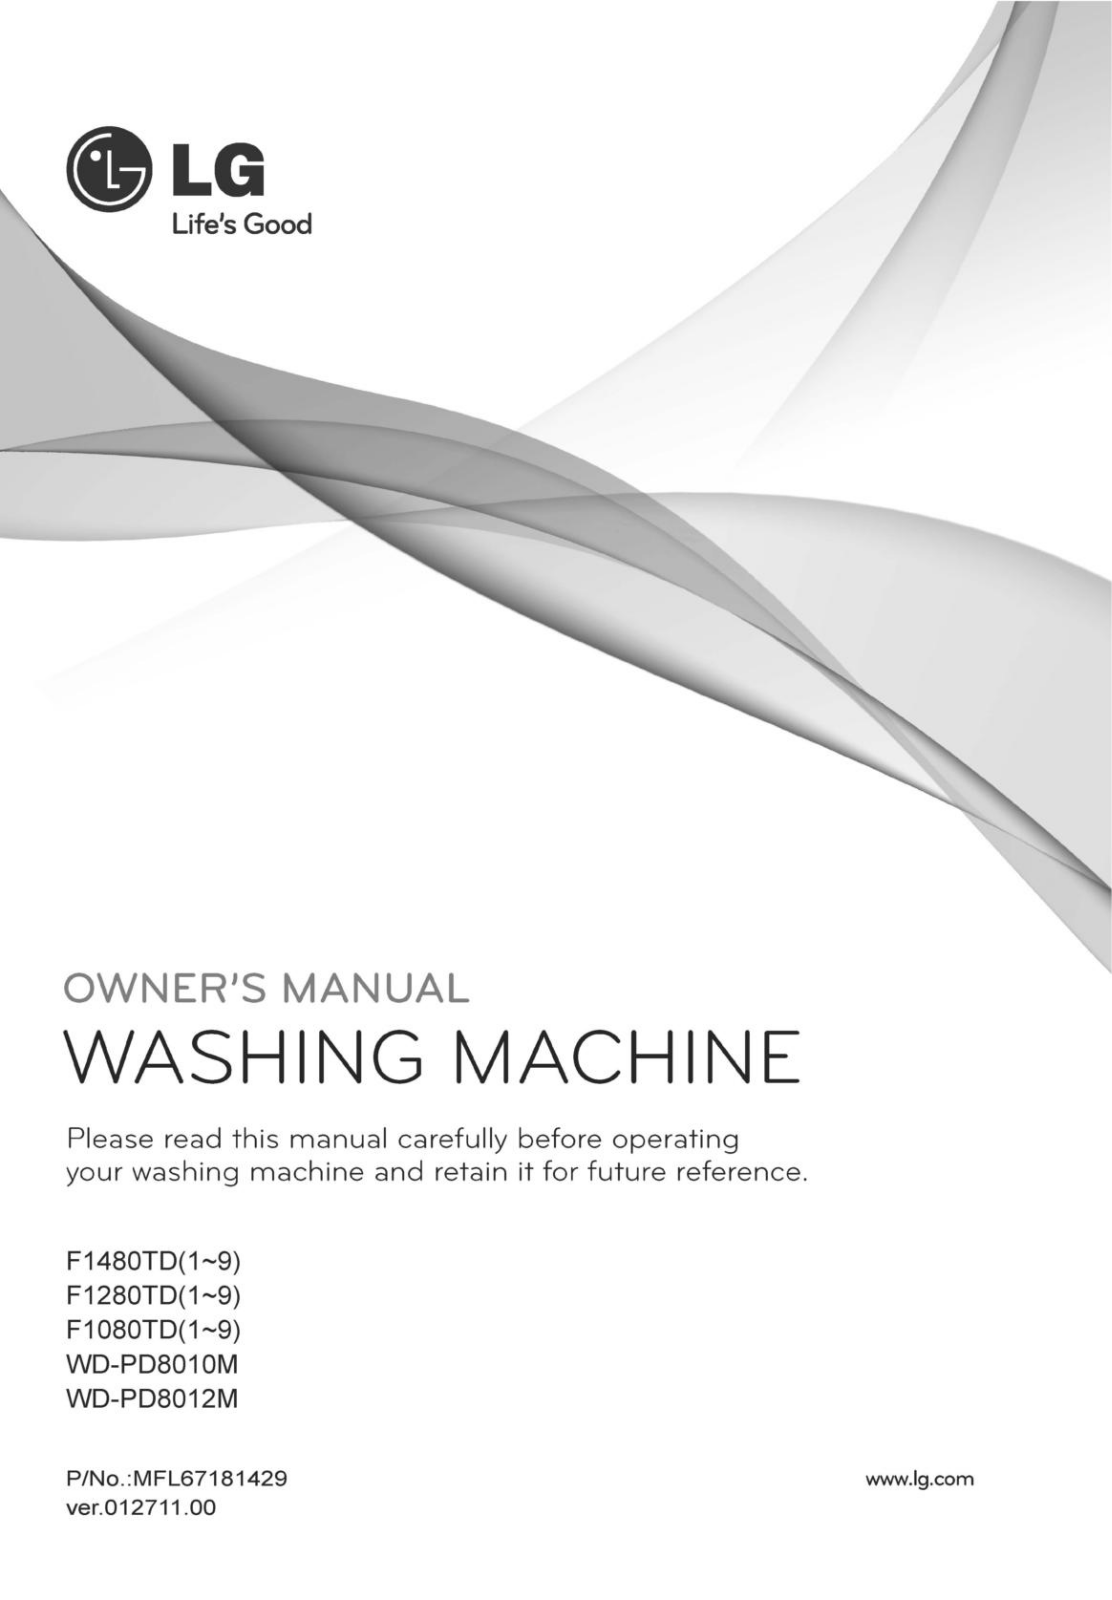 LG WD-PD8012M Owner’s Manual